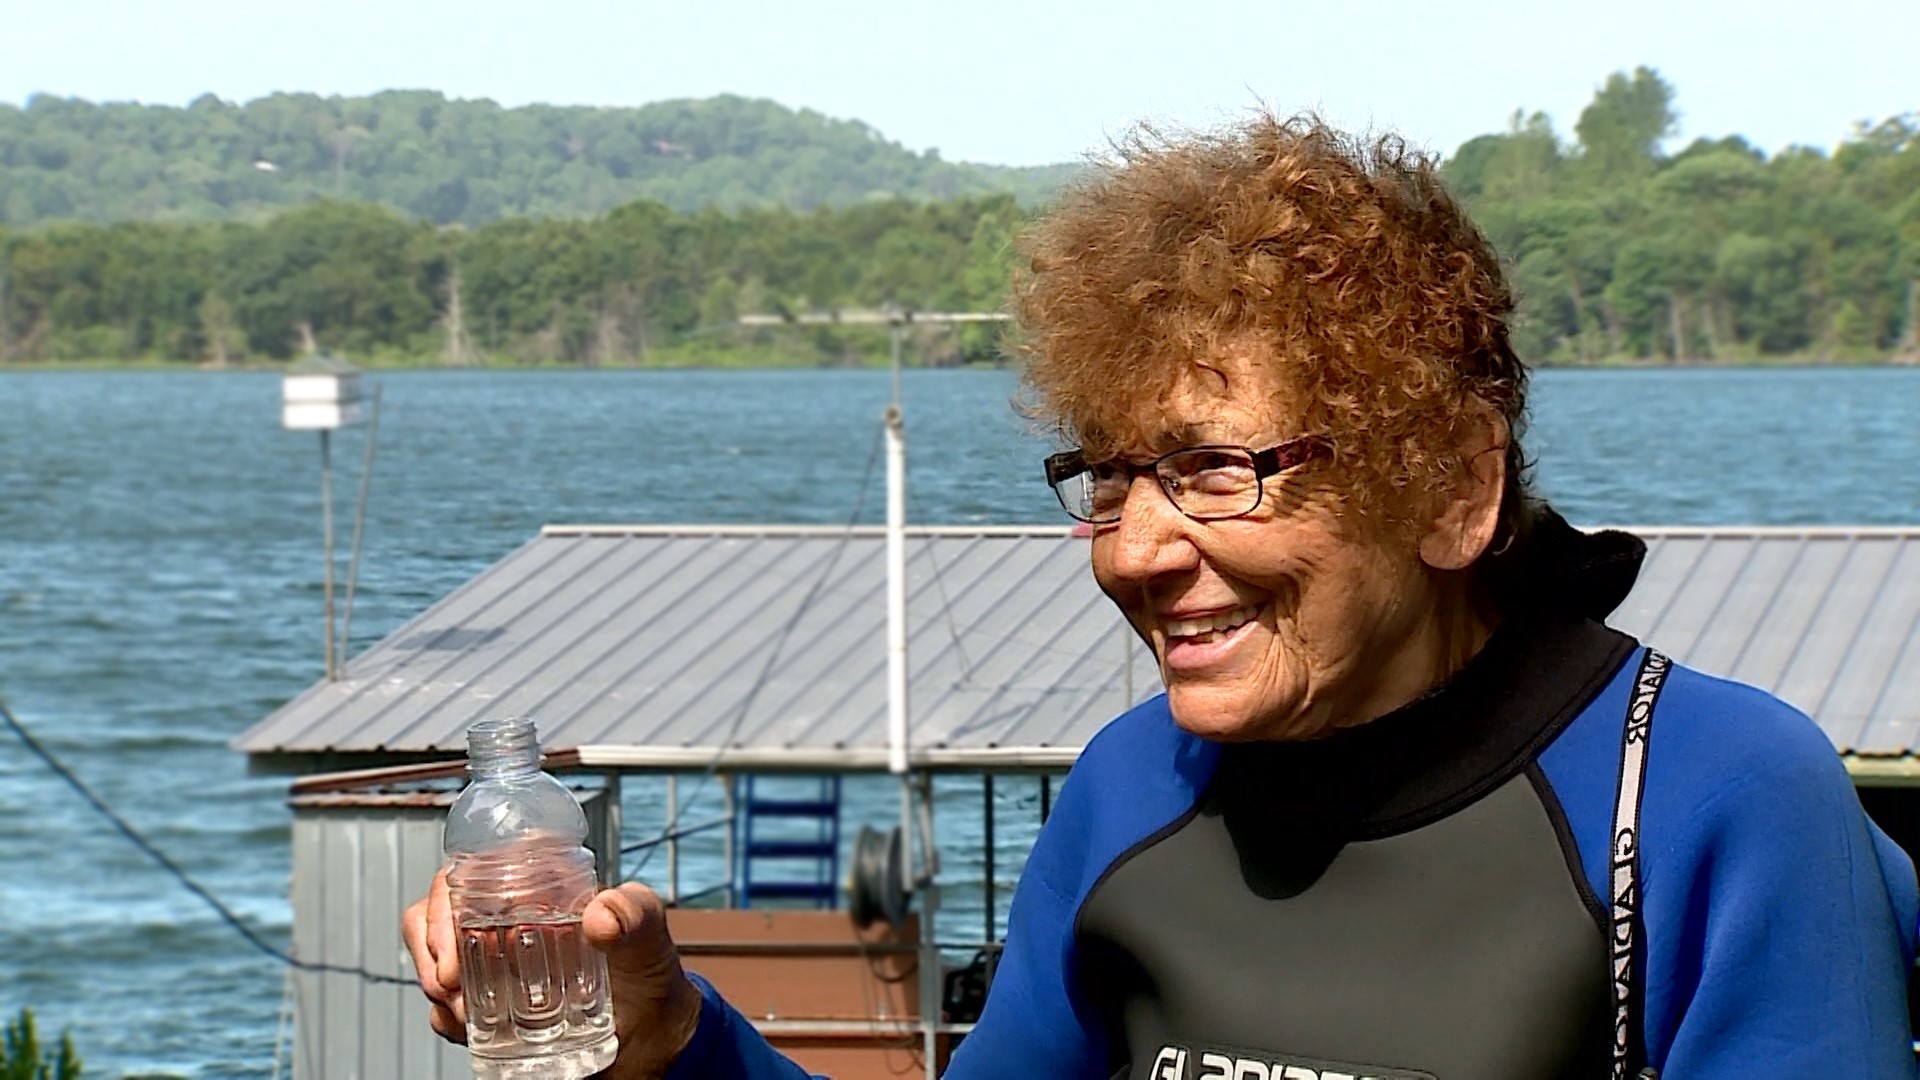 Gloria Sommers is an 82-year-old grandma of two who has been water skiing since she was around 17 years old.